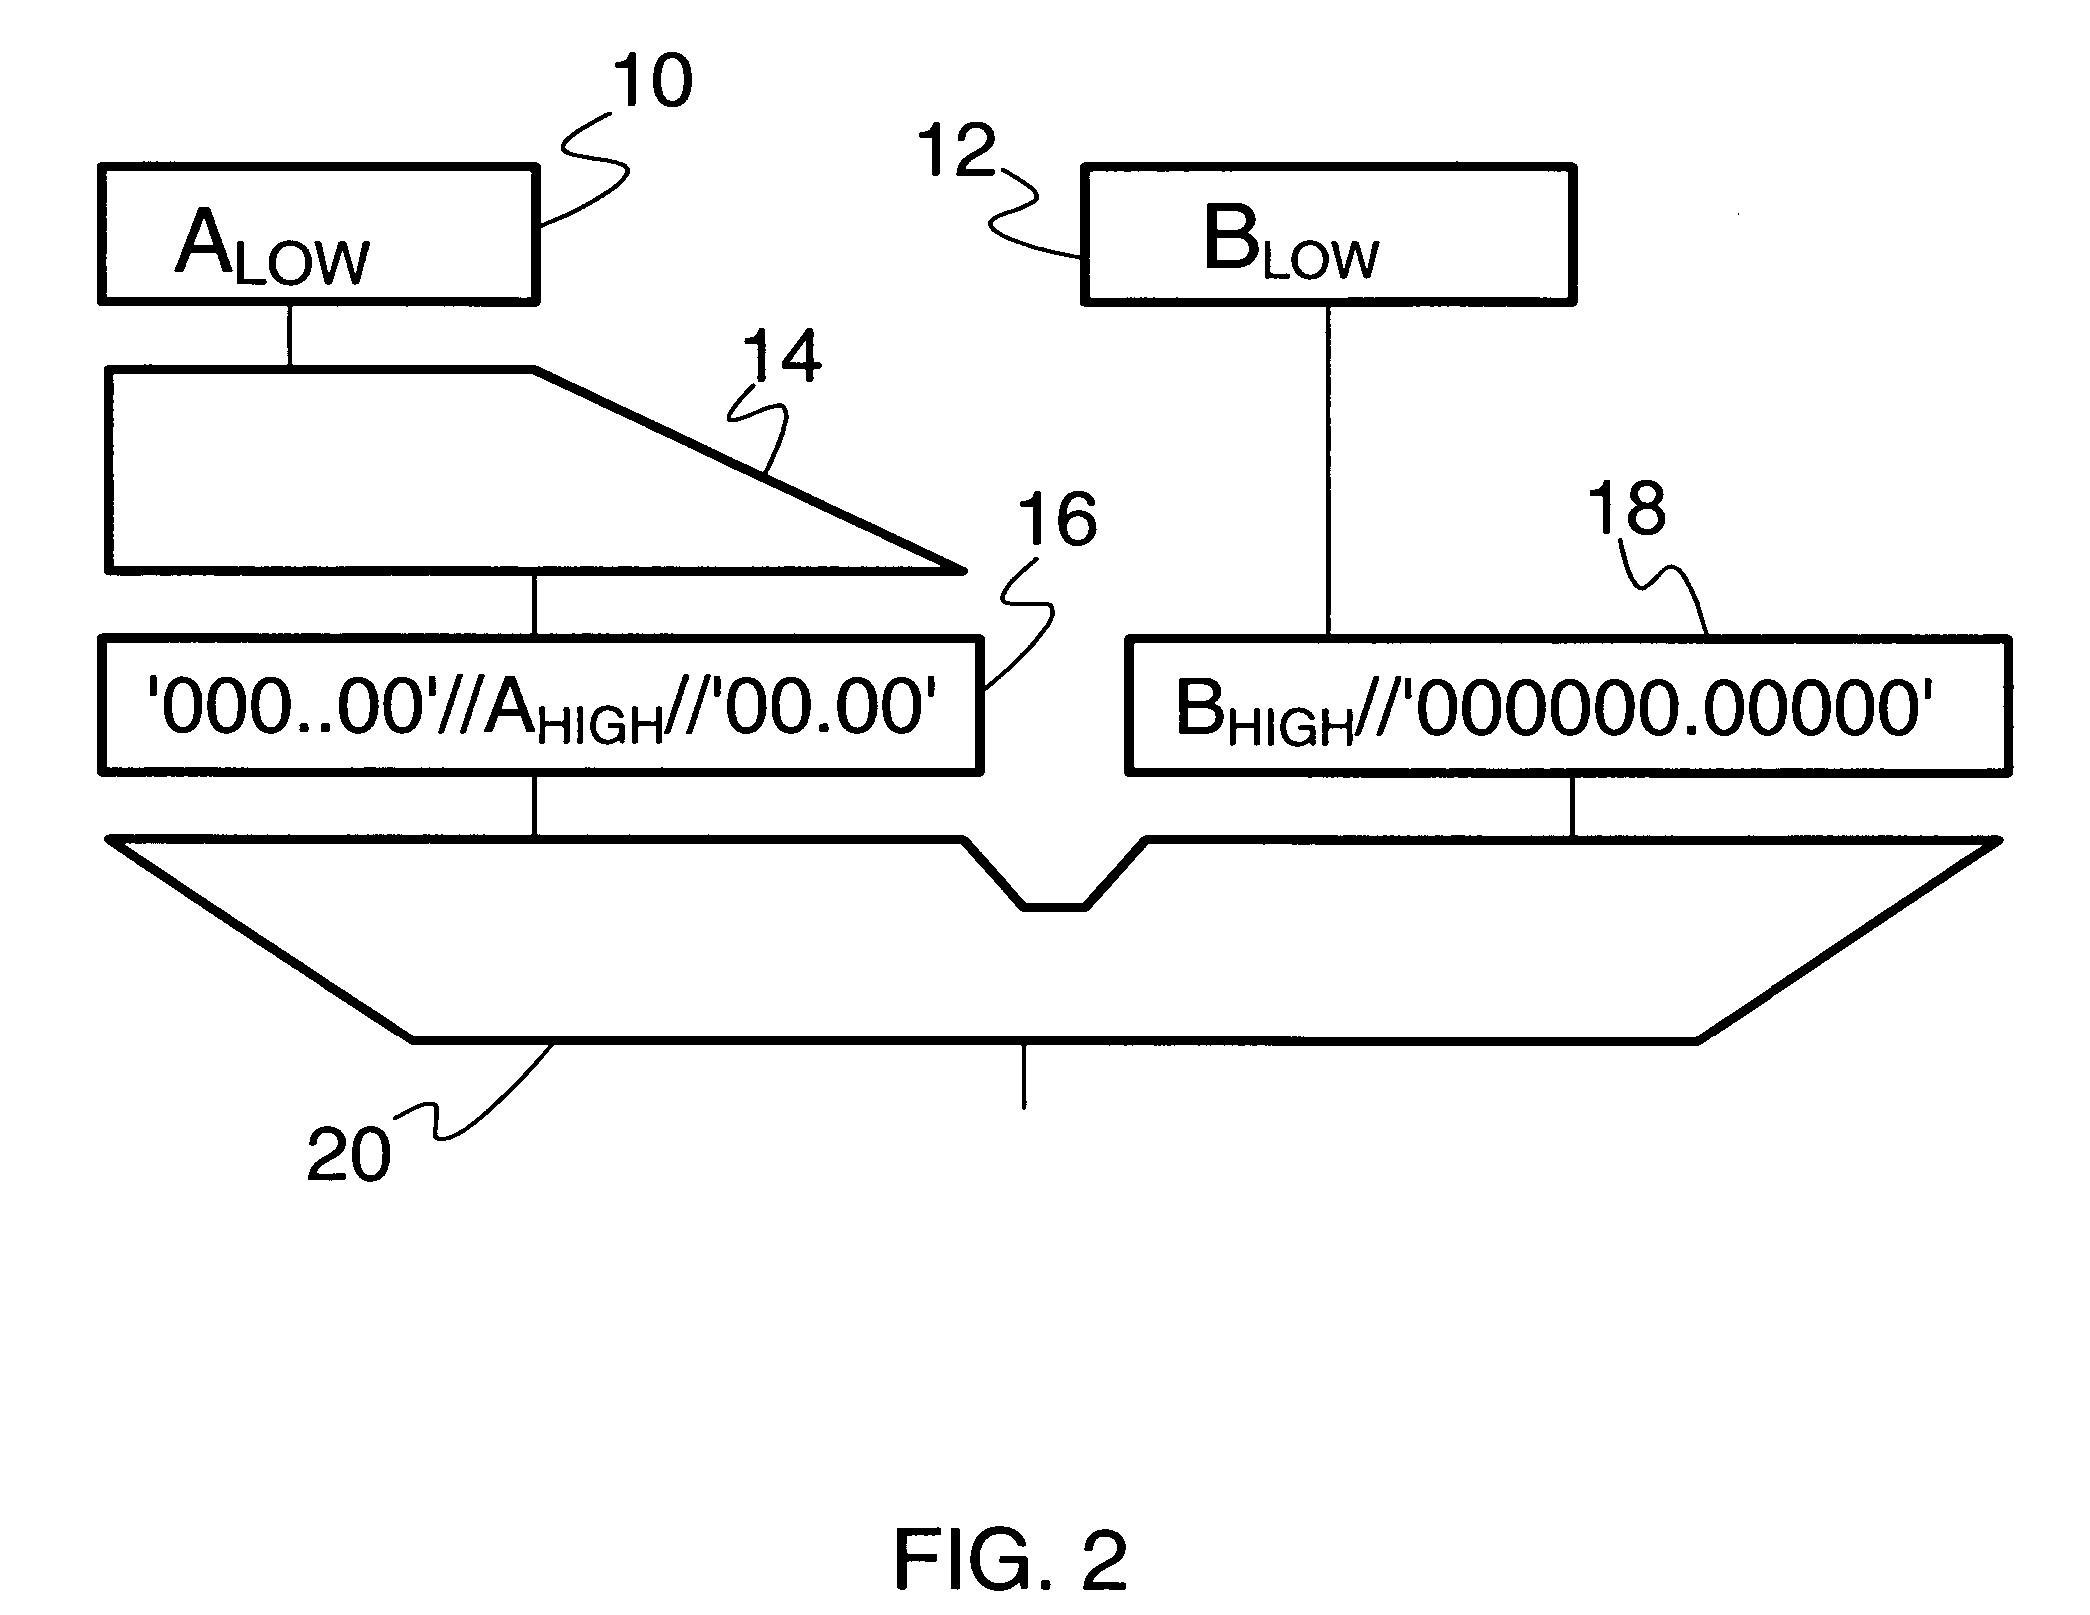 Advanced execution of extended floating-point add operations in a narrow dataflow